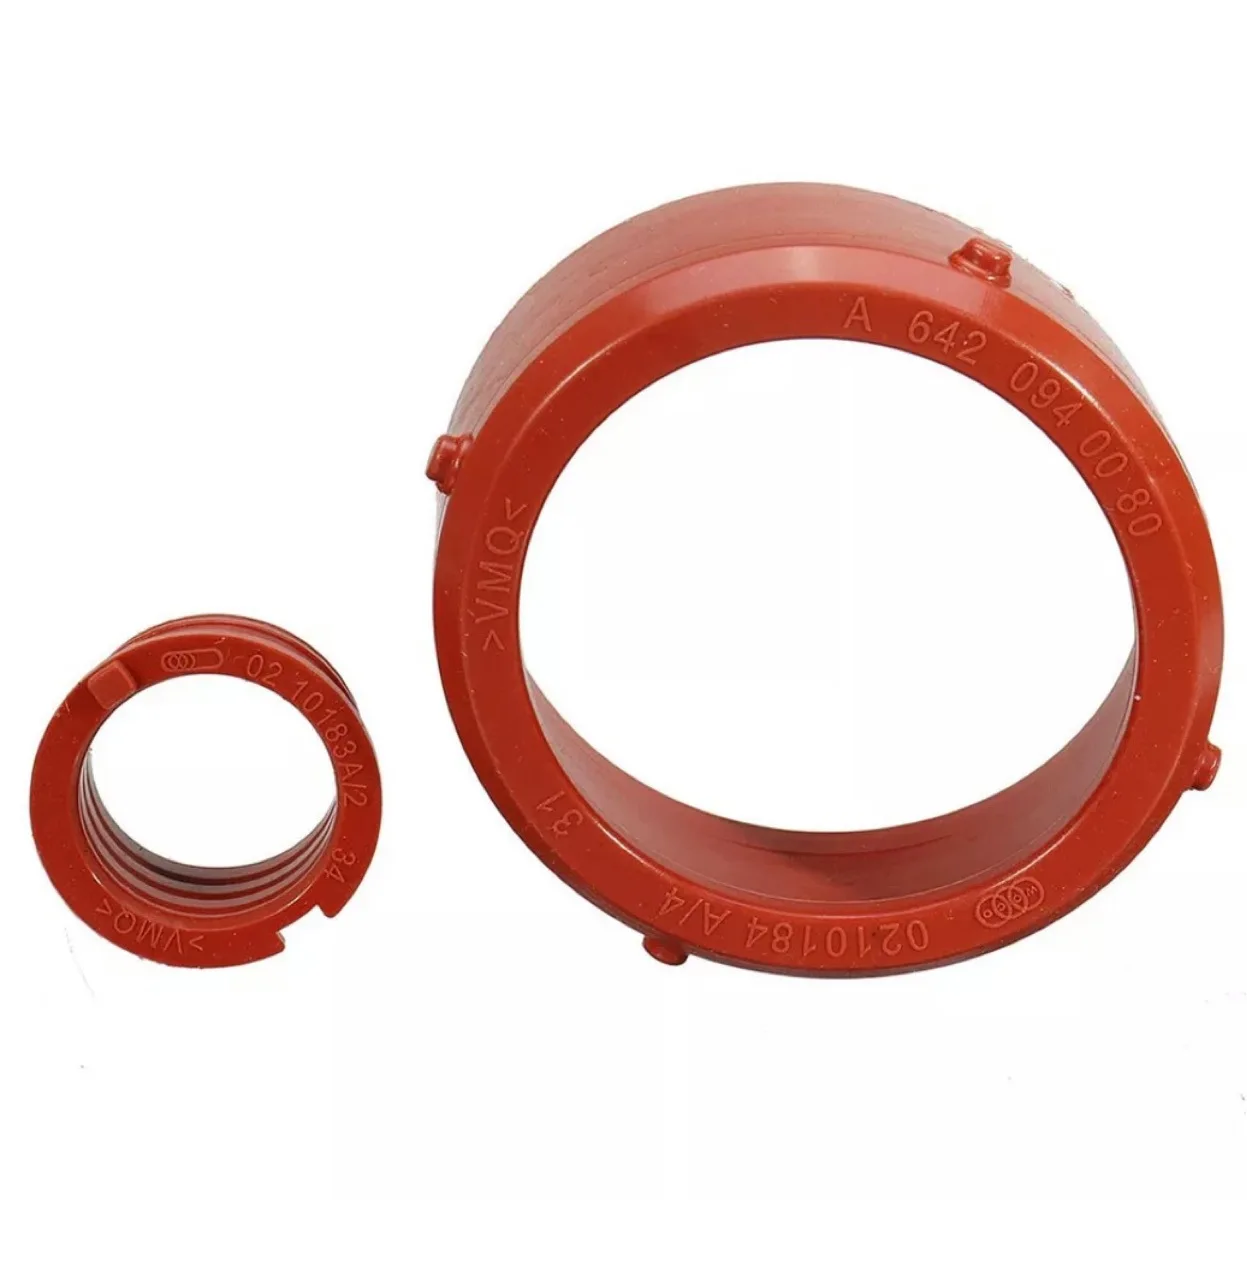 KIMISS Car Turbo Intake Seal & Engine Breather Seal Kit for Benz OM642 Engines OE A6420940080 